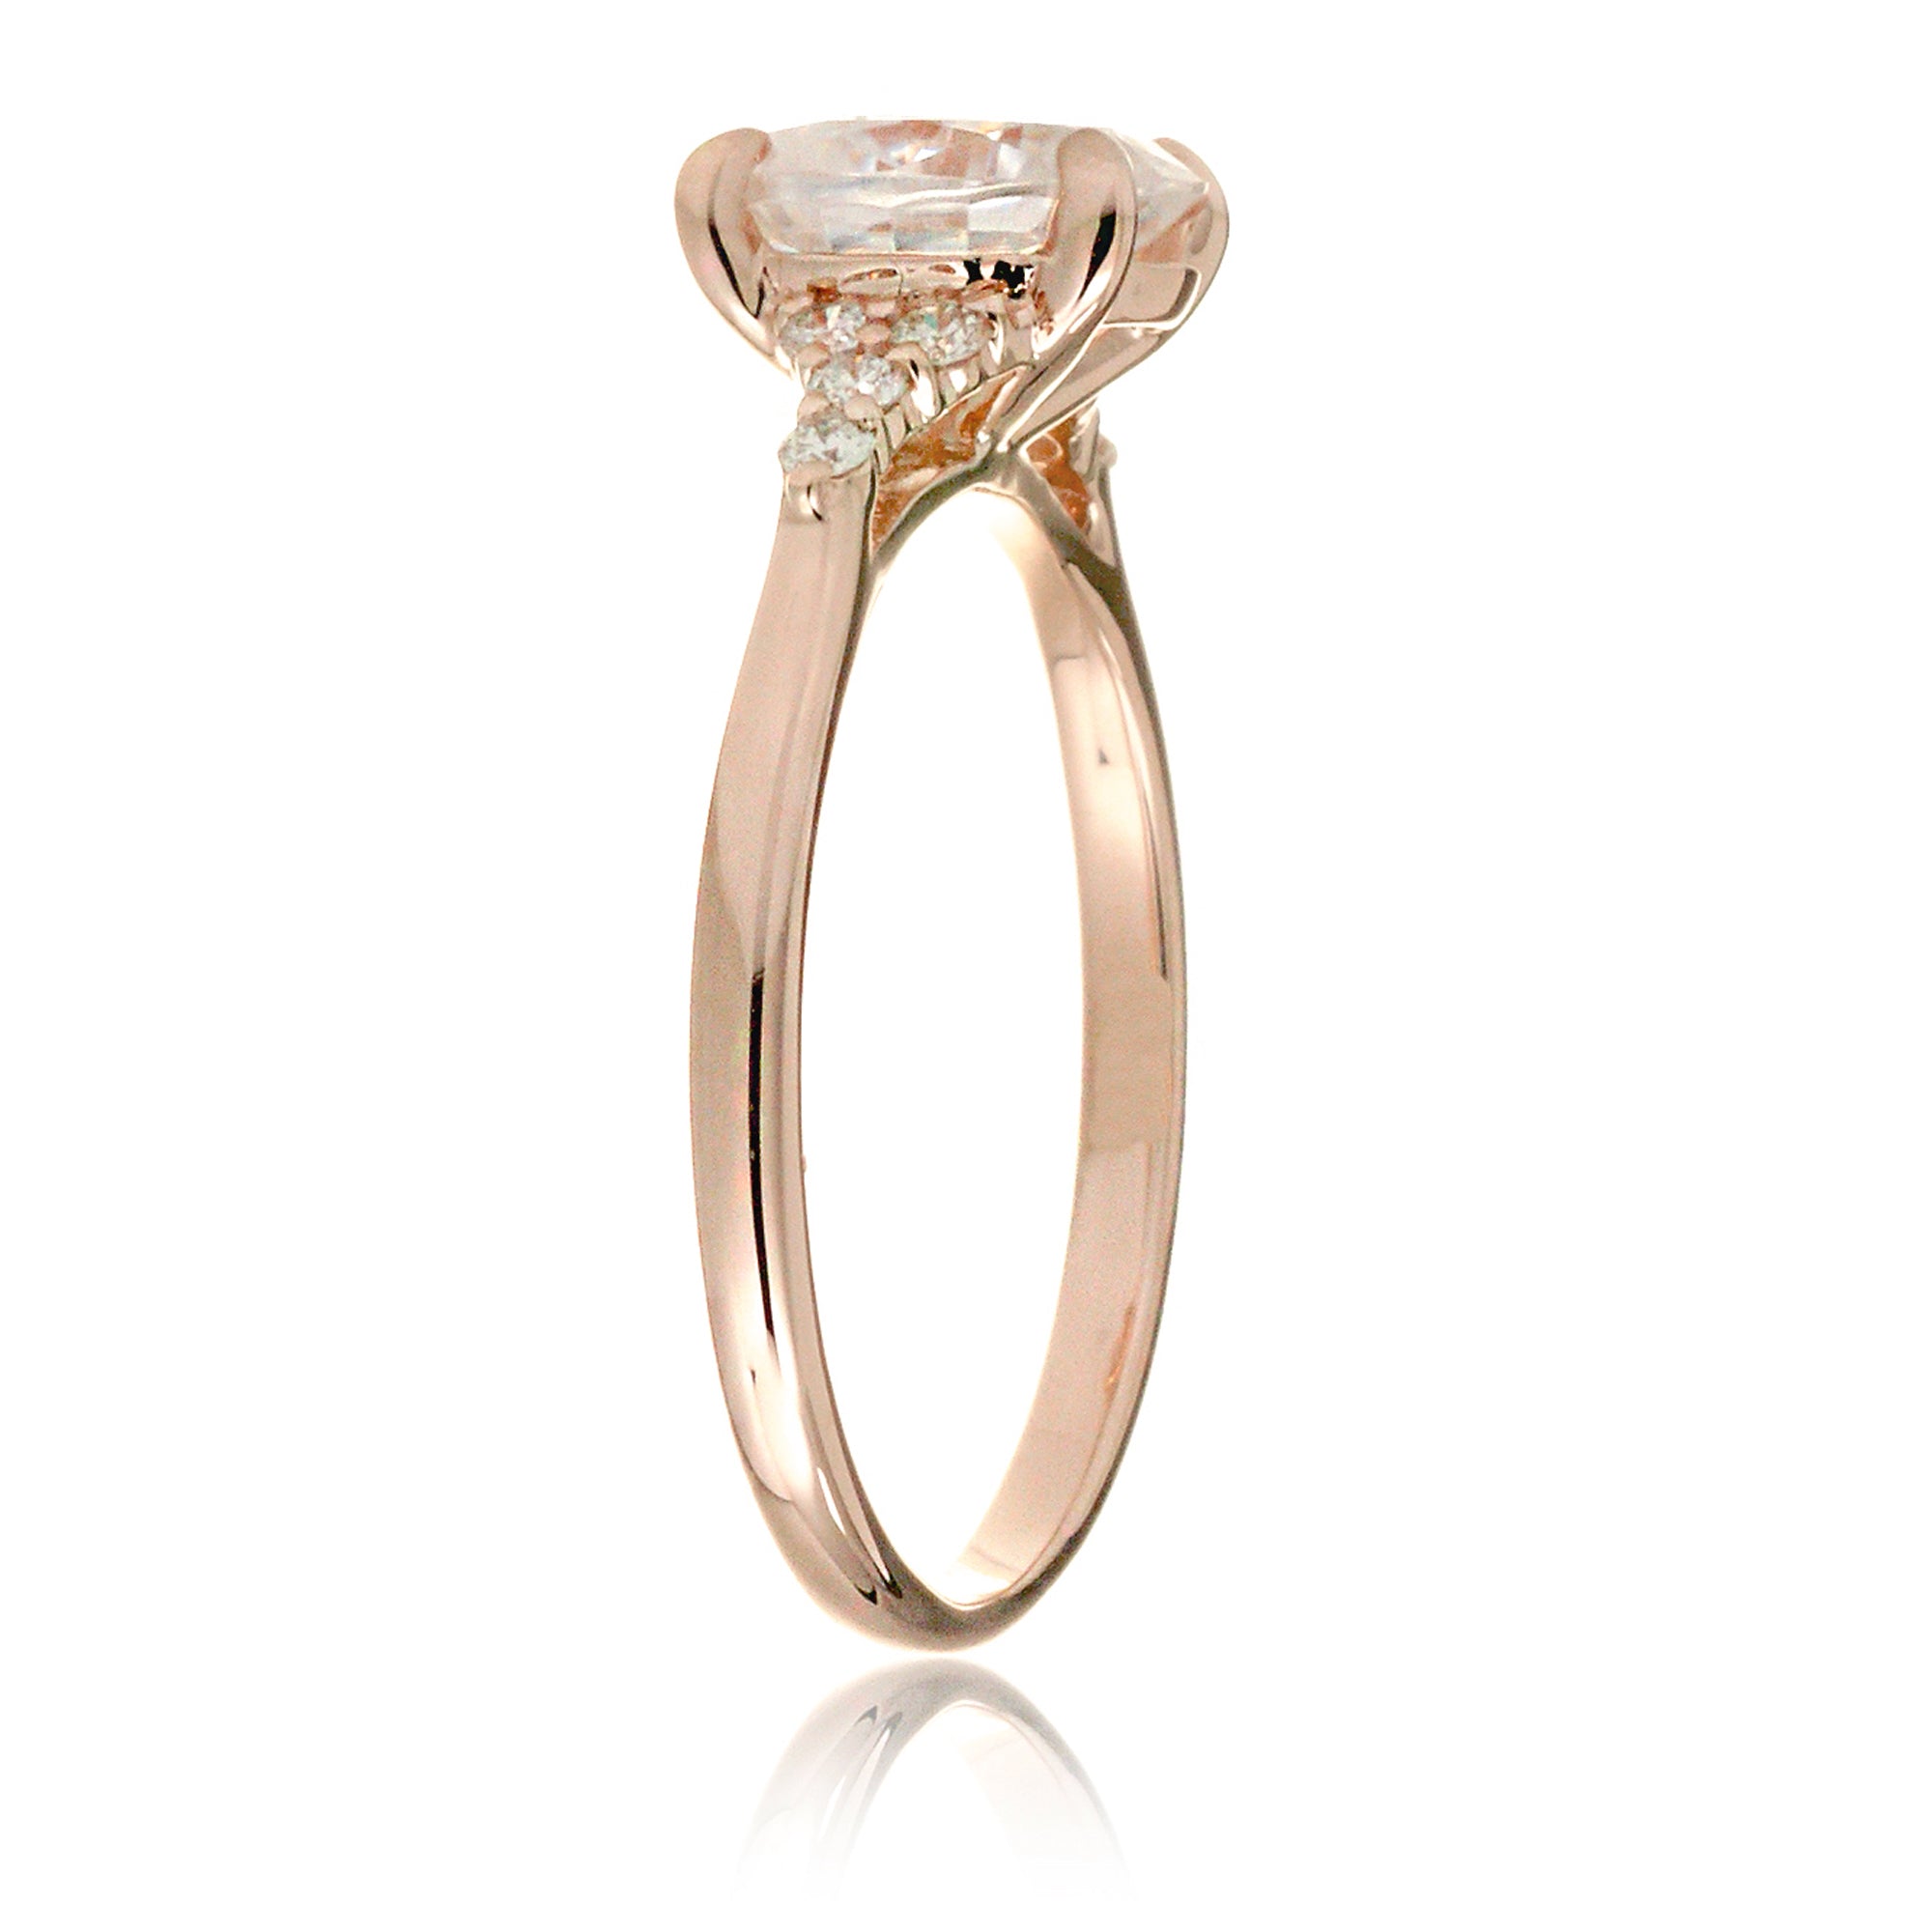 Oval moissanite ring in rose gold with side diamonds lab-grown - the Chloe ring